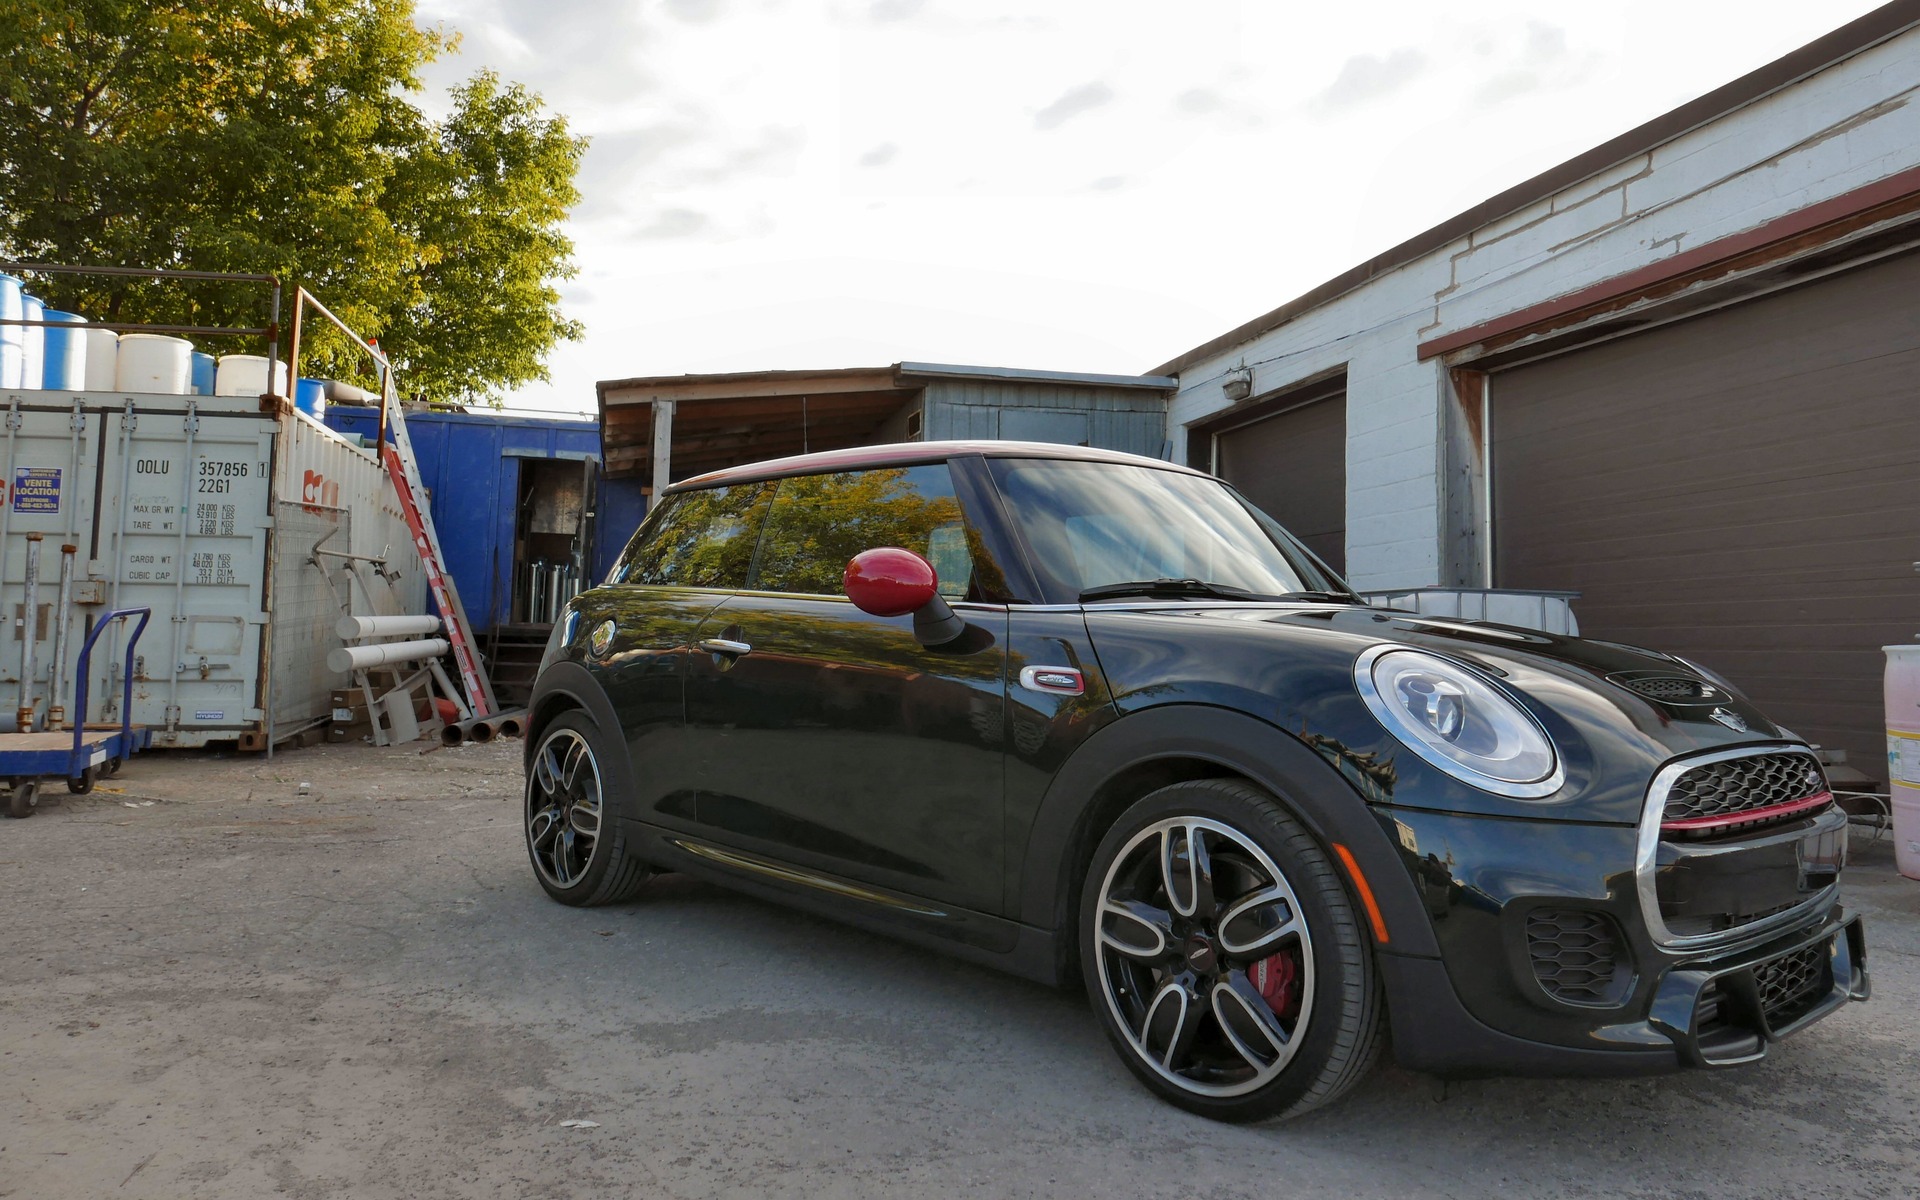 The John Cooper Works model is more powerful than ever before.